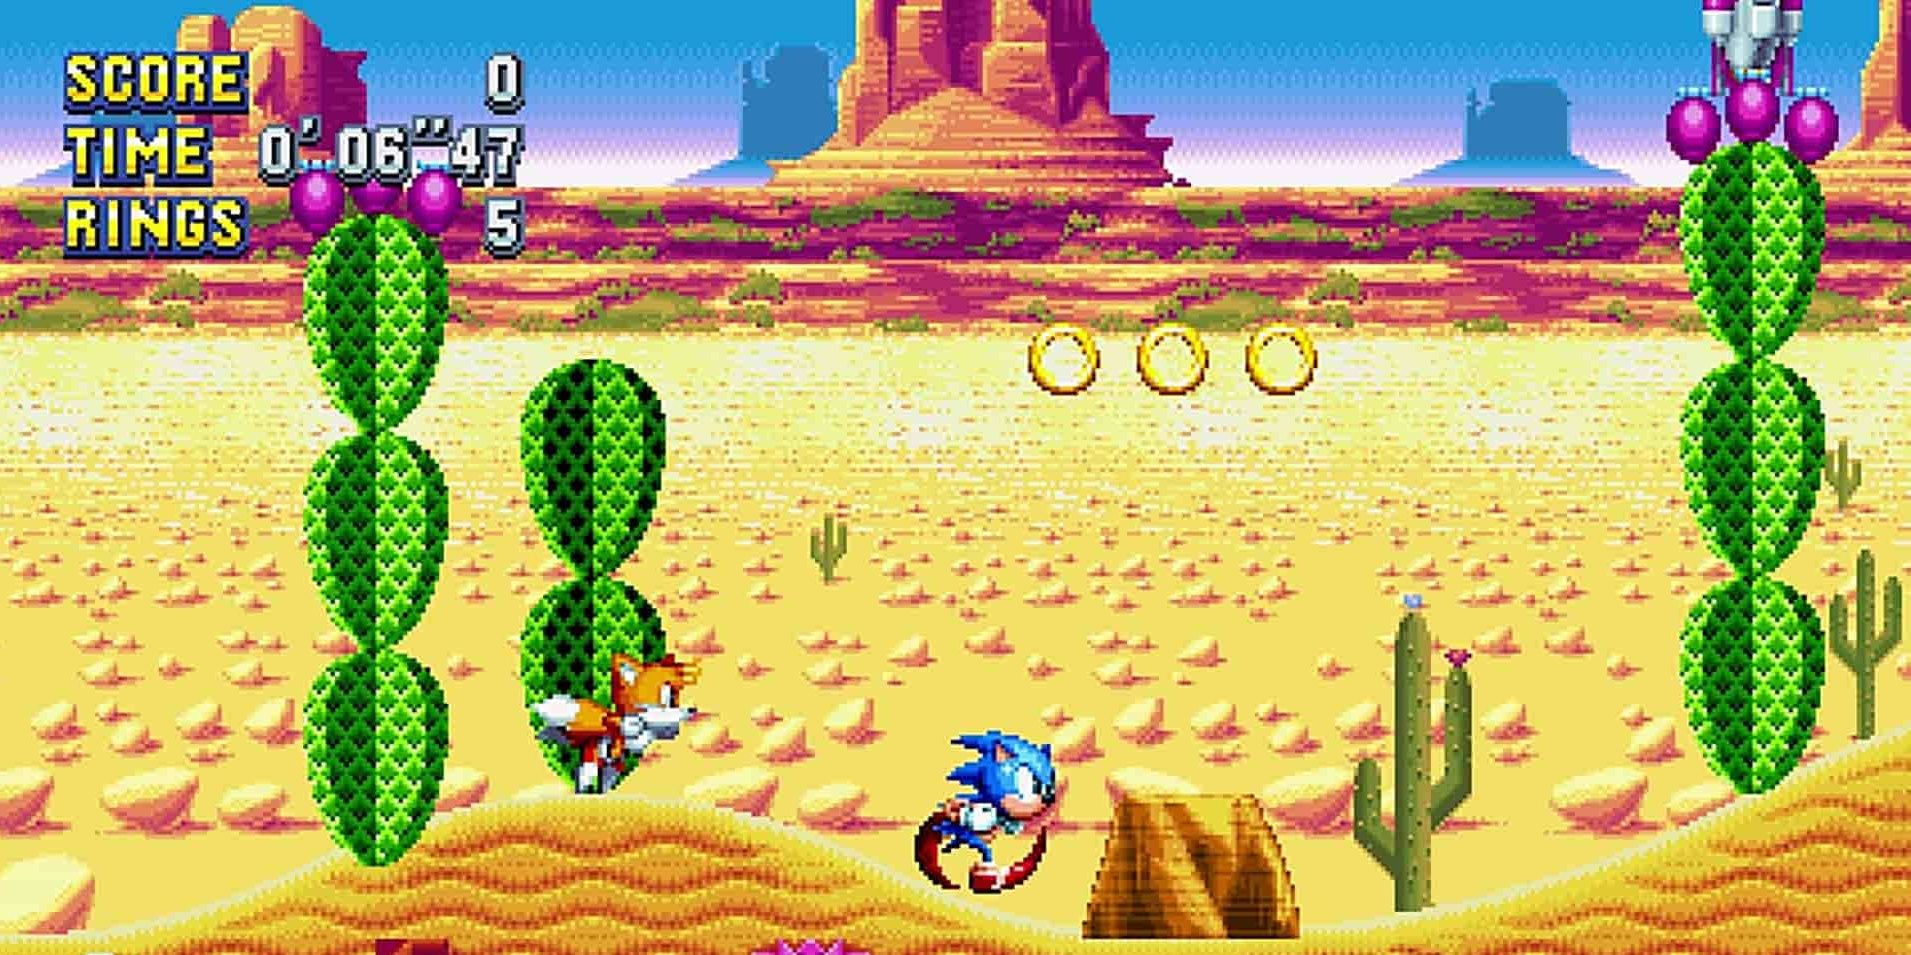 Sonic and Tails in Saloon Zone in Sonic Mania